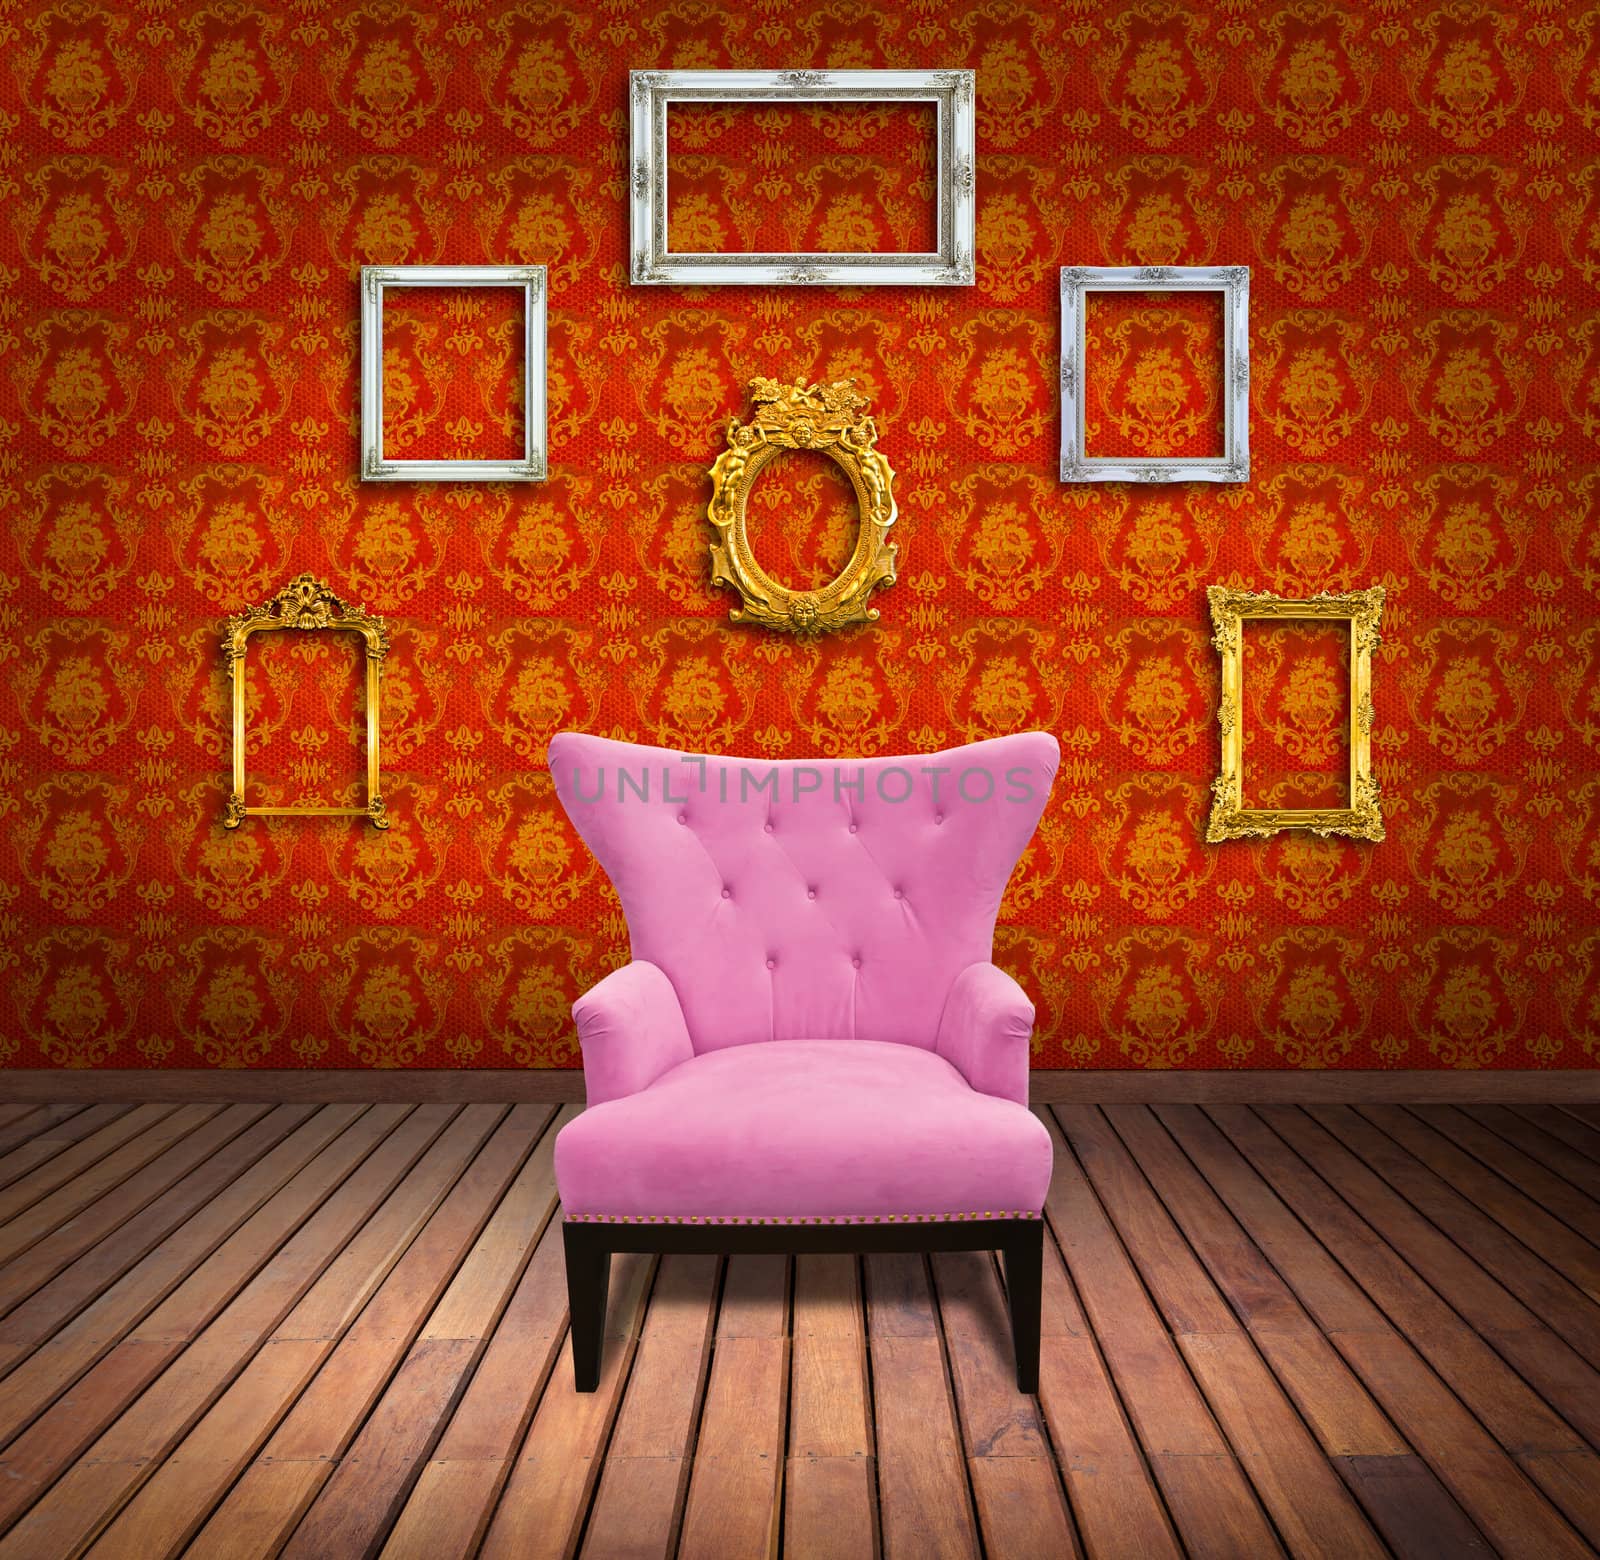 Sofa and frame in yellow wallpaper room